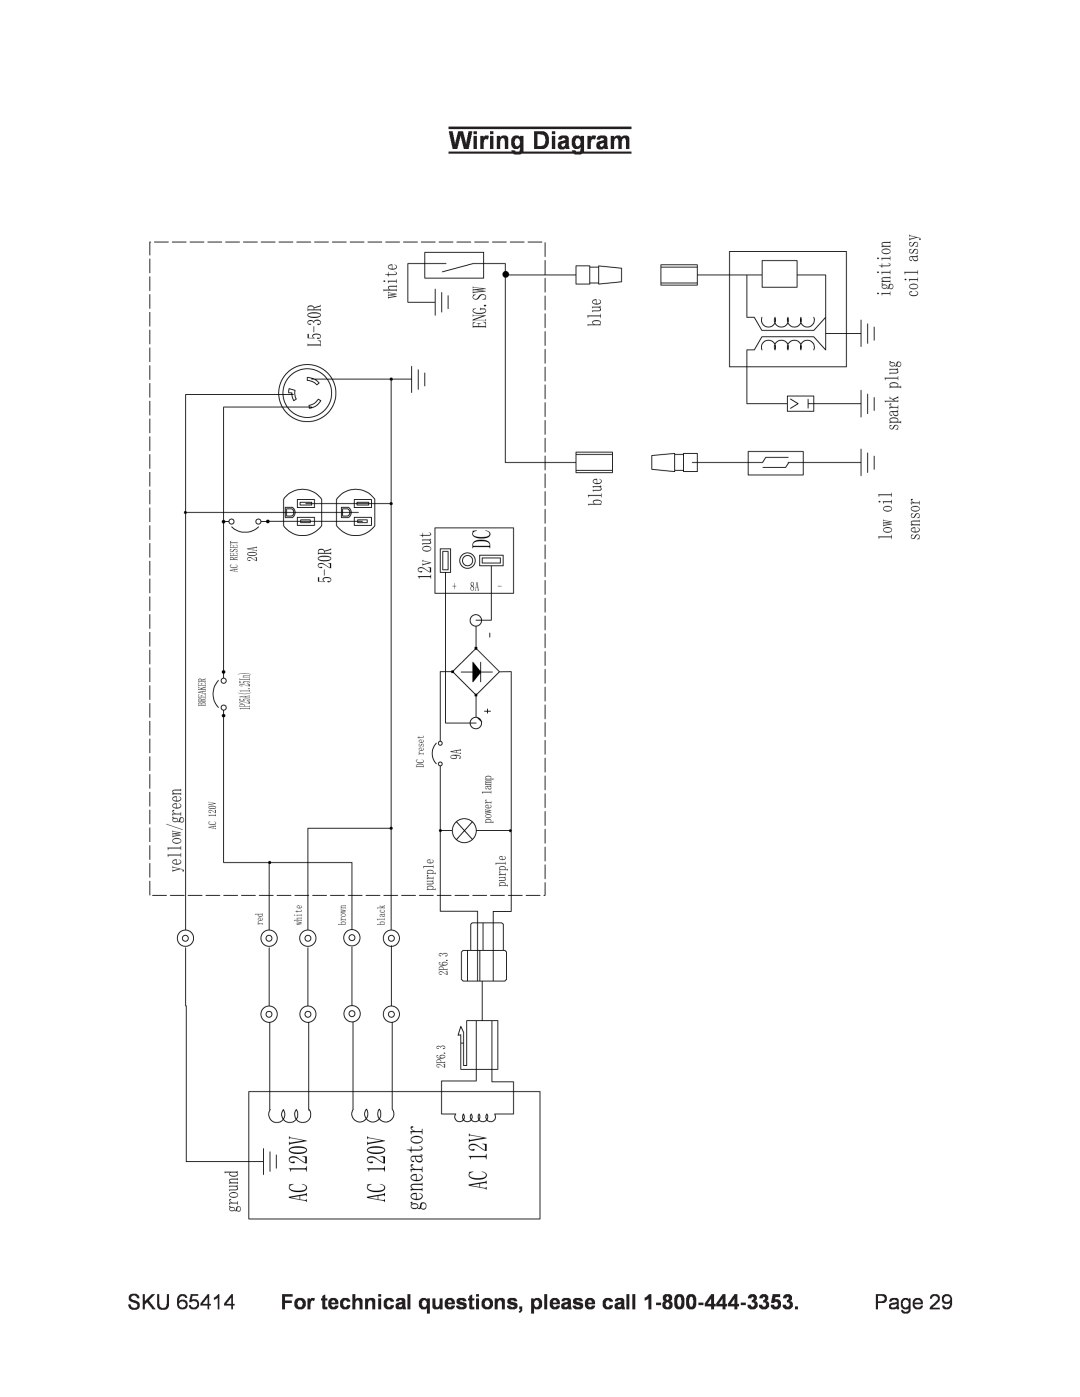 Chicago Electric 65414 manual Wiring Diagram, For technical questions, please call 